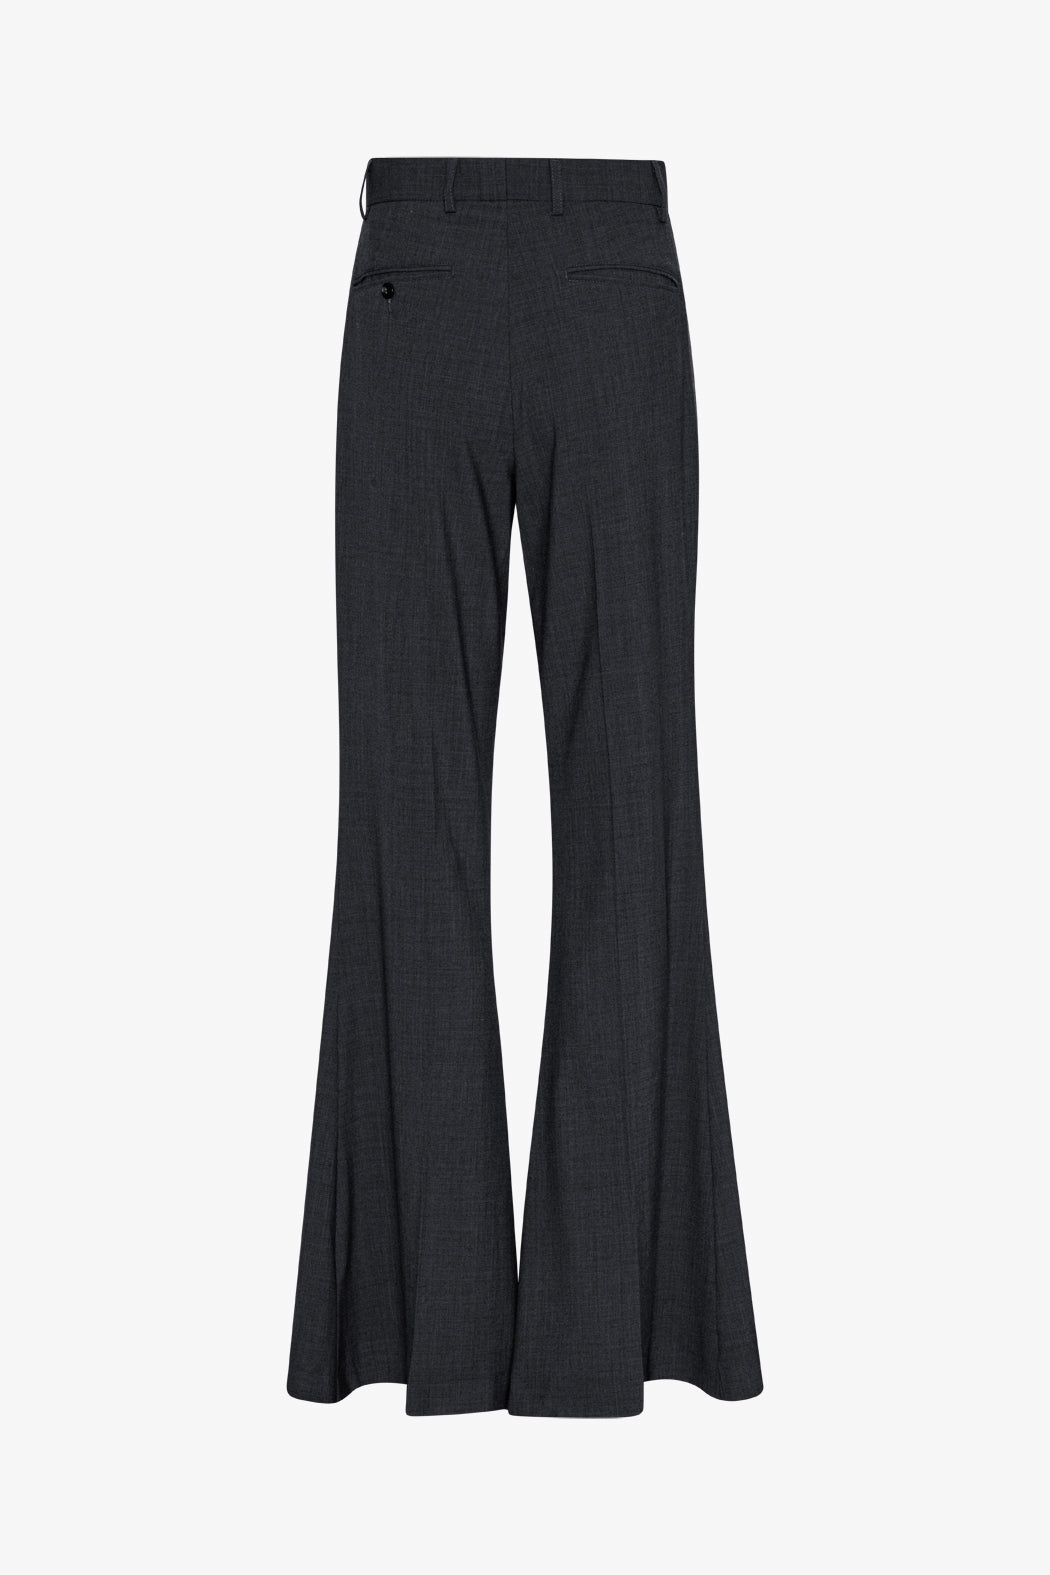 Bootcut suiting pant